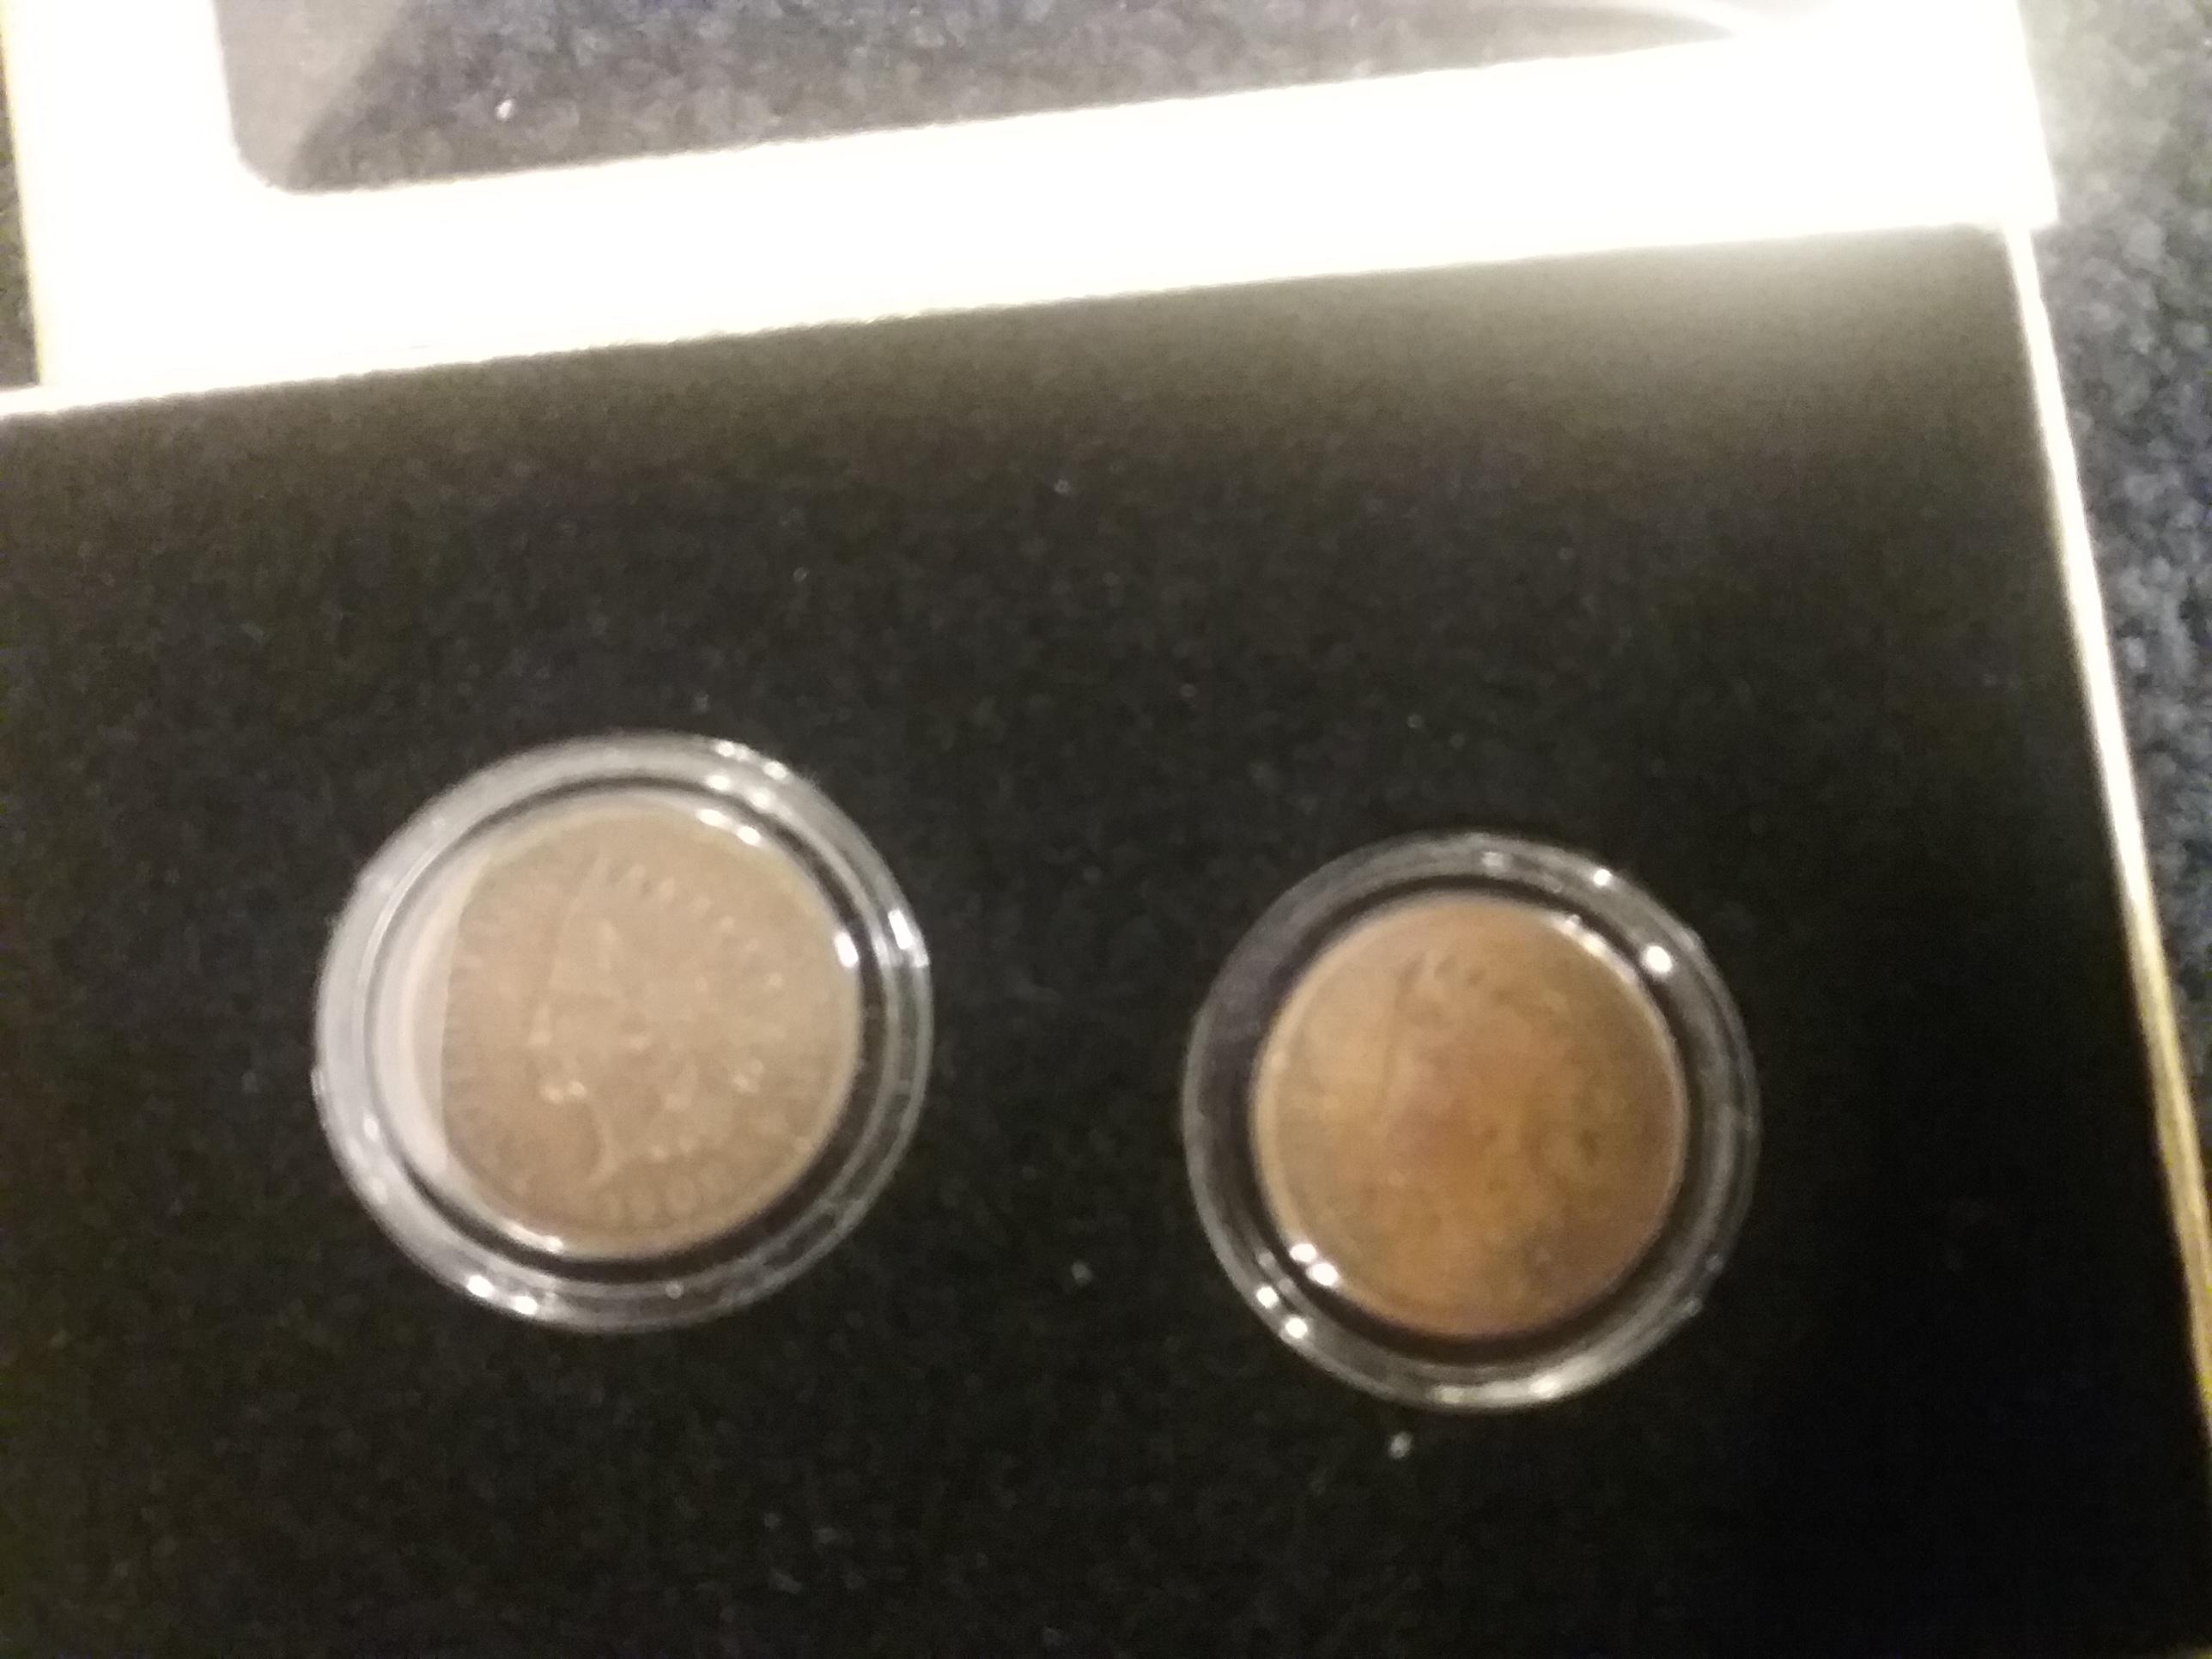 Franklin Ment Bicentennial Proof Medal and a two-set of Indian cents